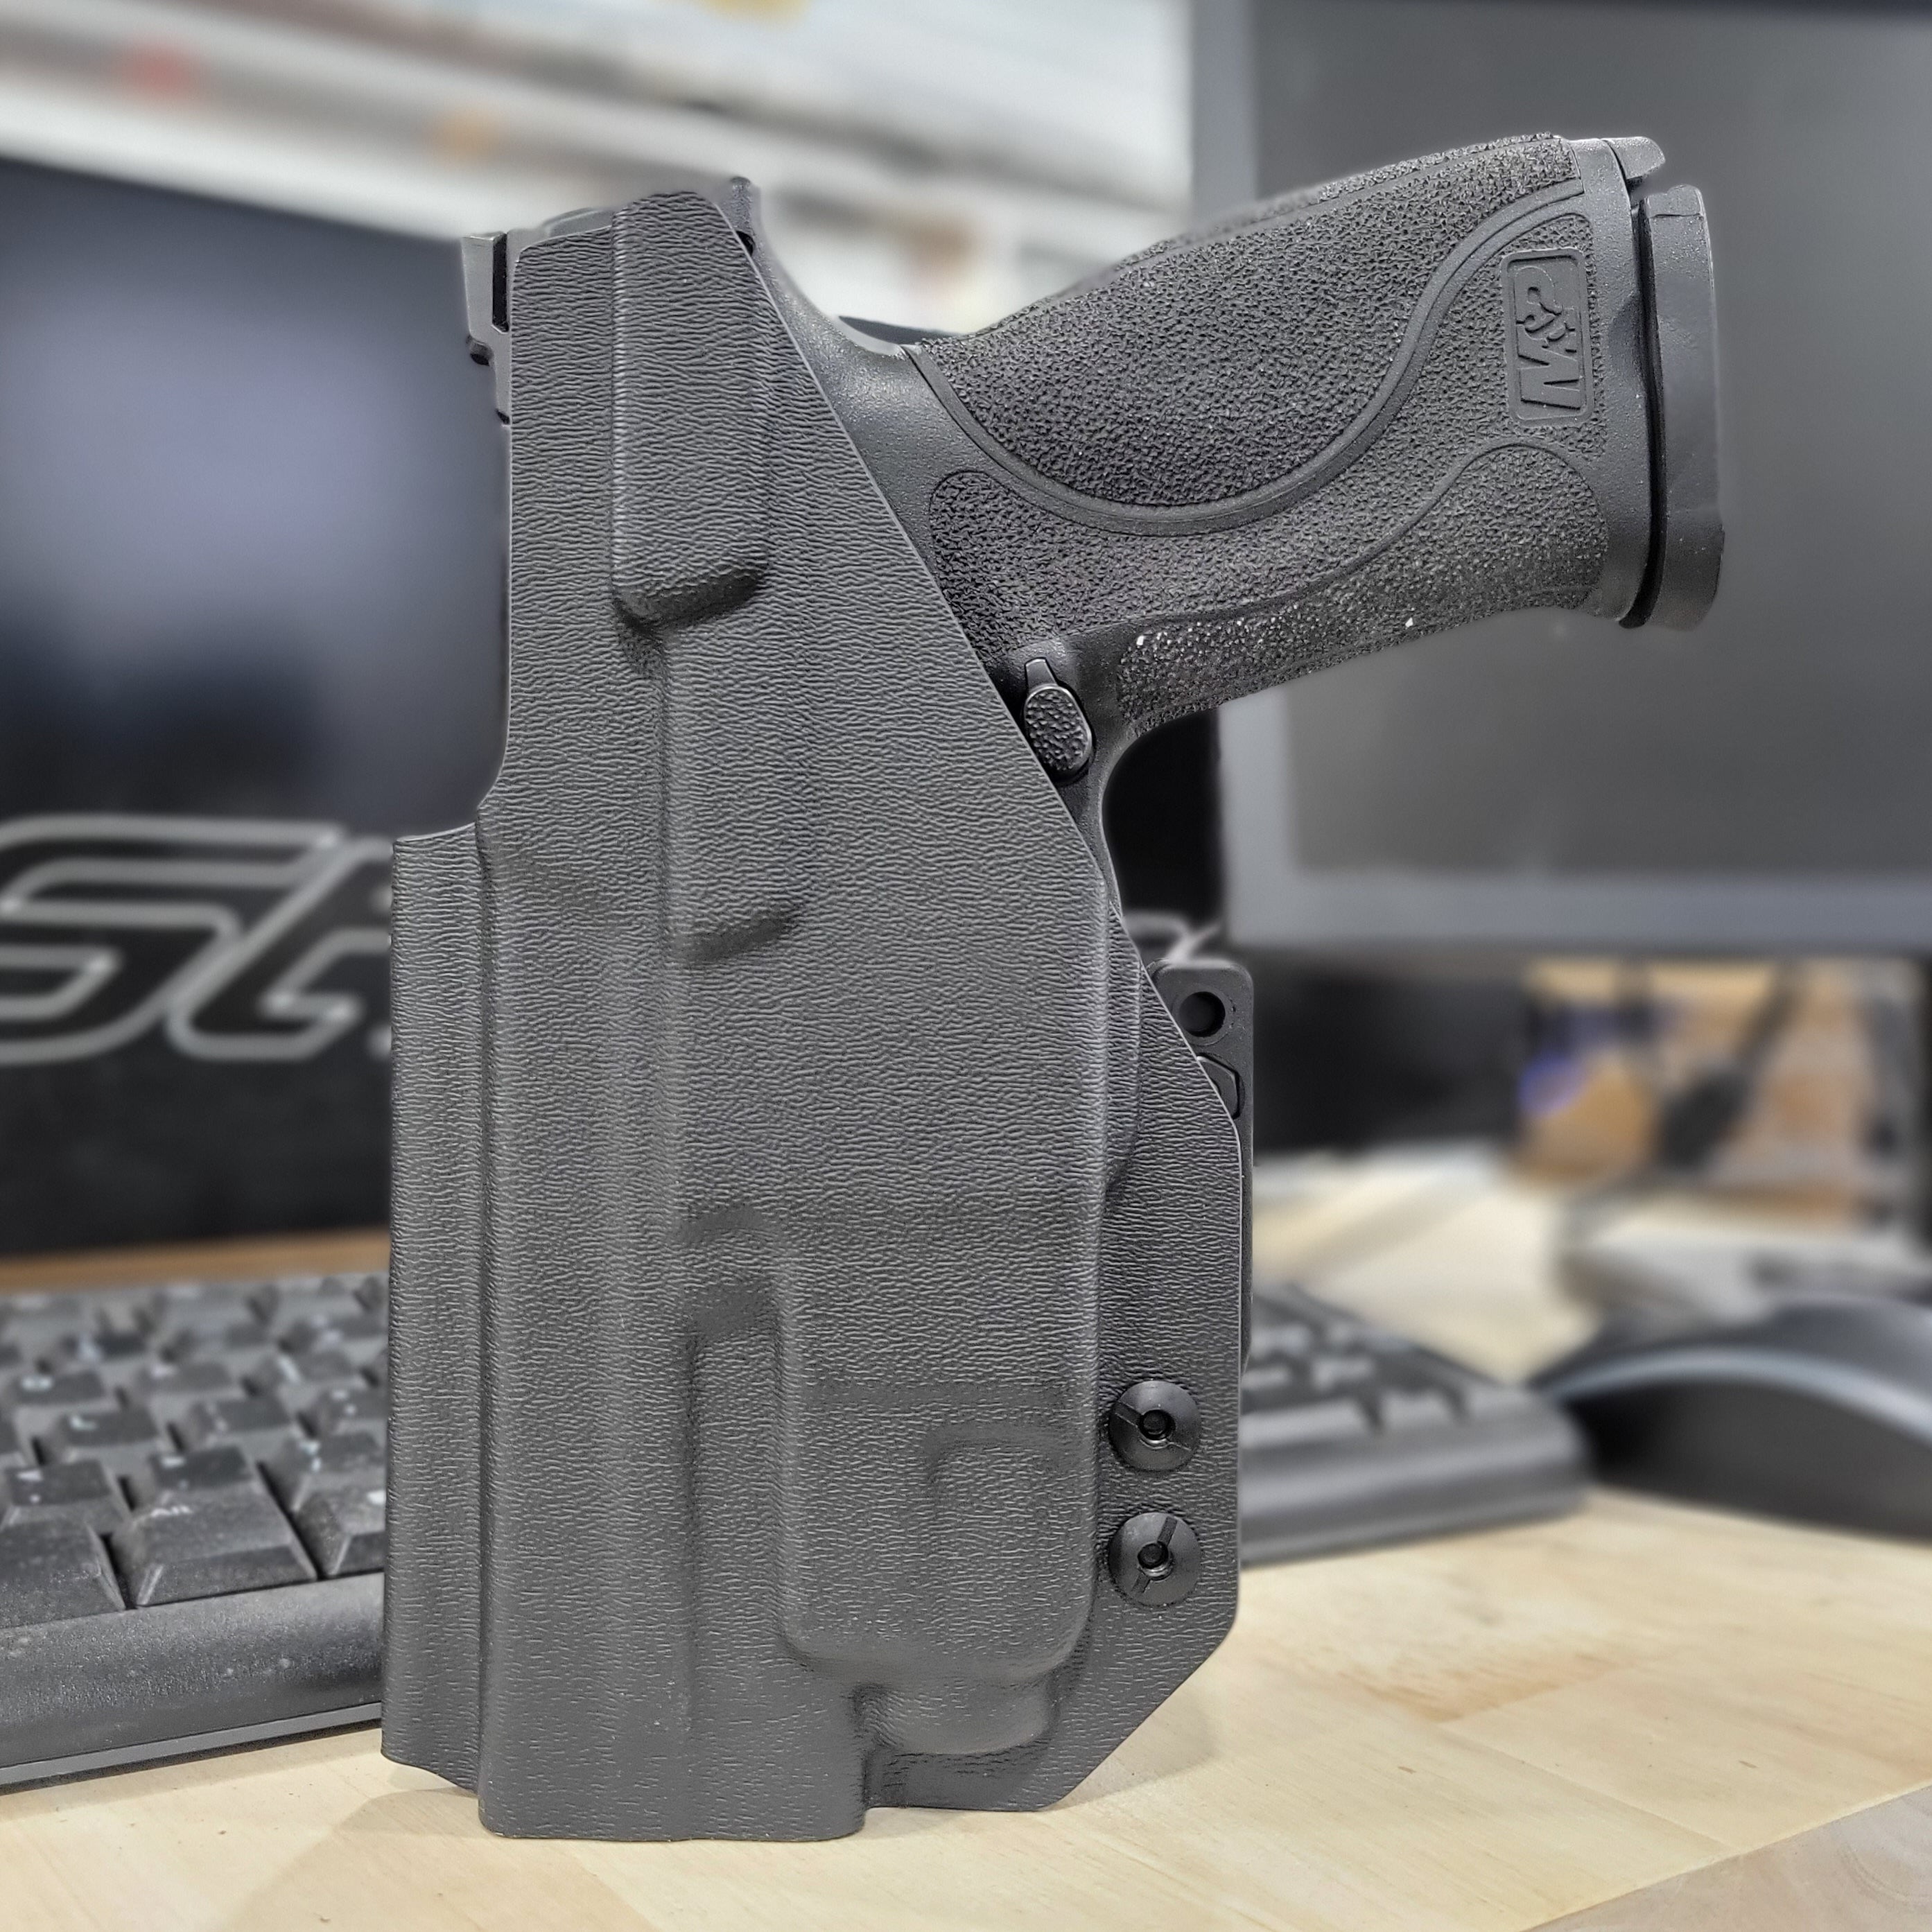 Best Inside Waistband IWB AIWB Kydex Holster designed to fit the Smith & Wesson M&P M2.0  9mm 4.25" pistols with the Streamlight TLR-7 or TLR-7A light mounted to the pistol. Full sweat guard, adjustable retention, minimal material, & smooth edges to reduce printing. Cleared for red dot sights. Proudly made in the USA. 